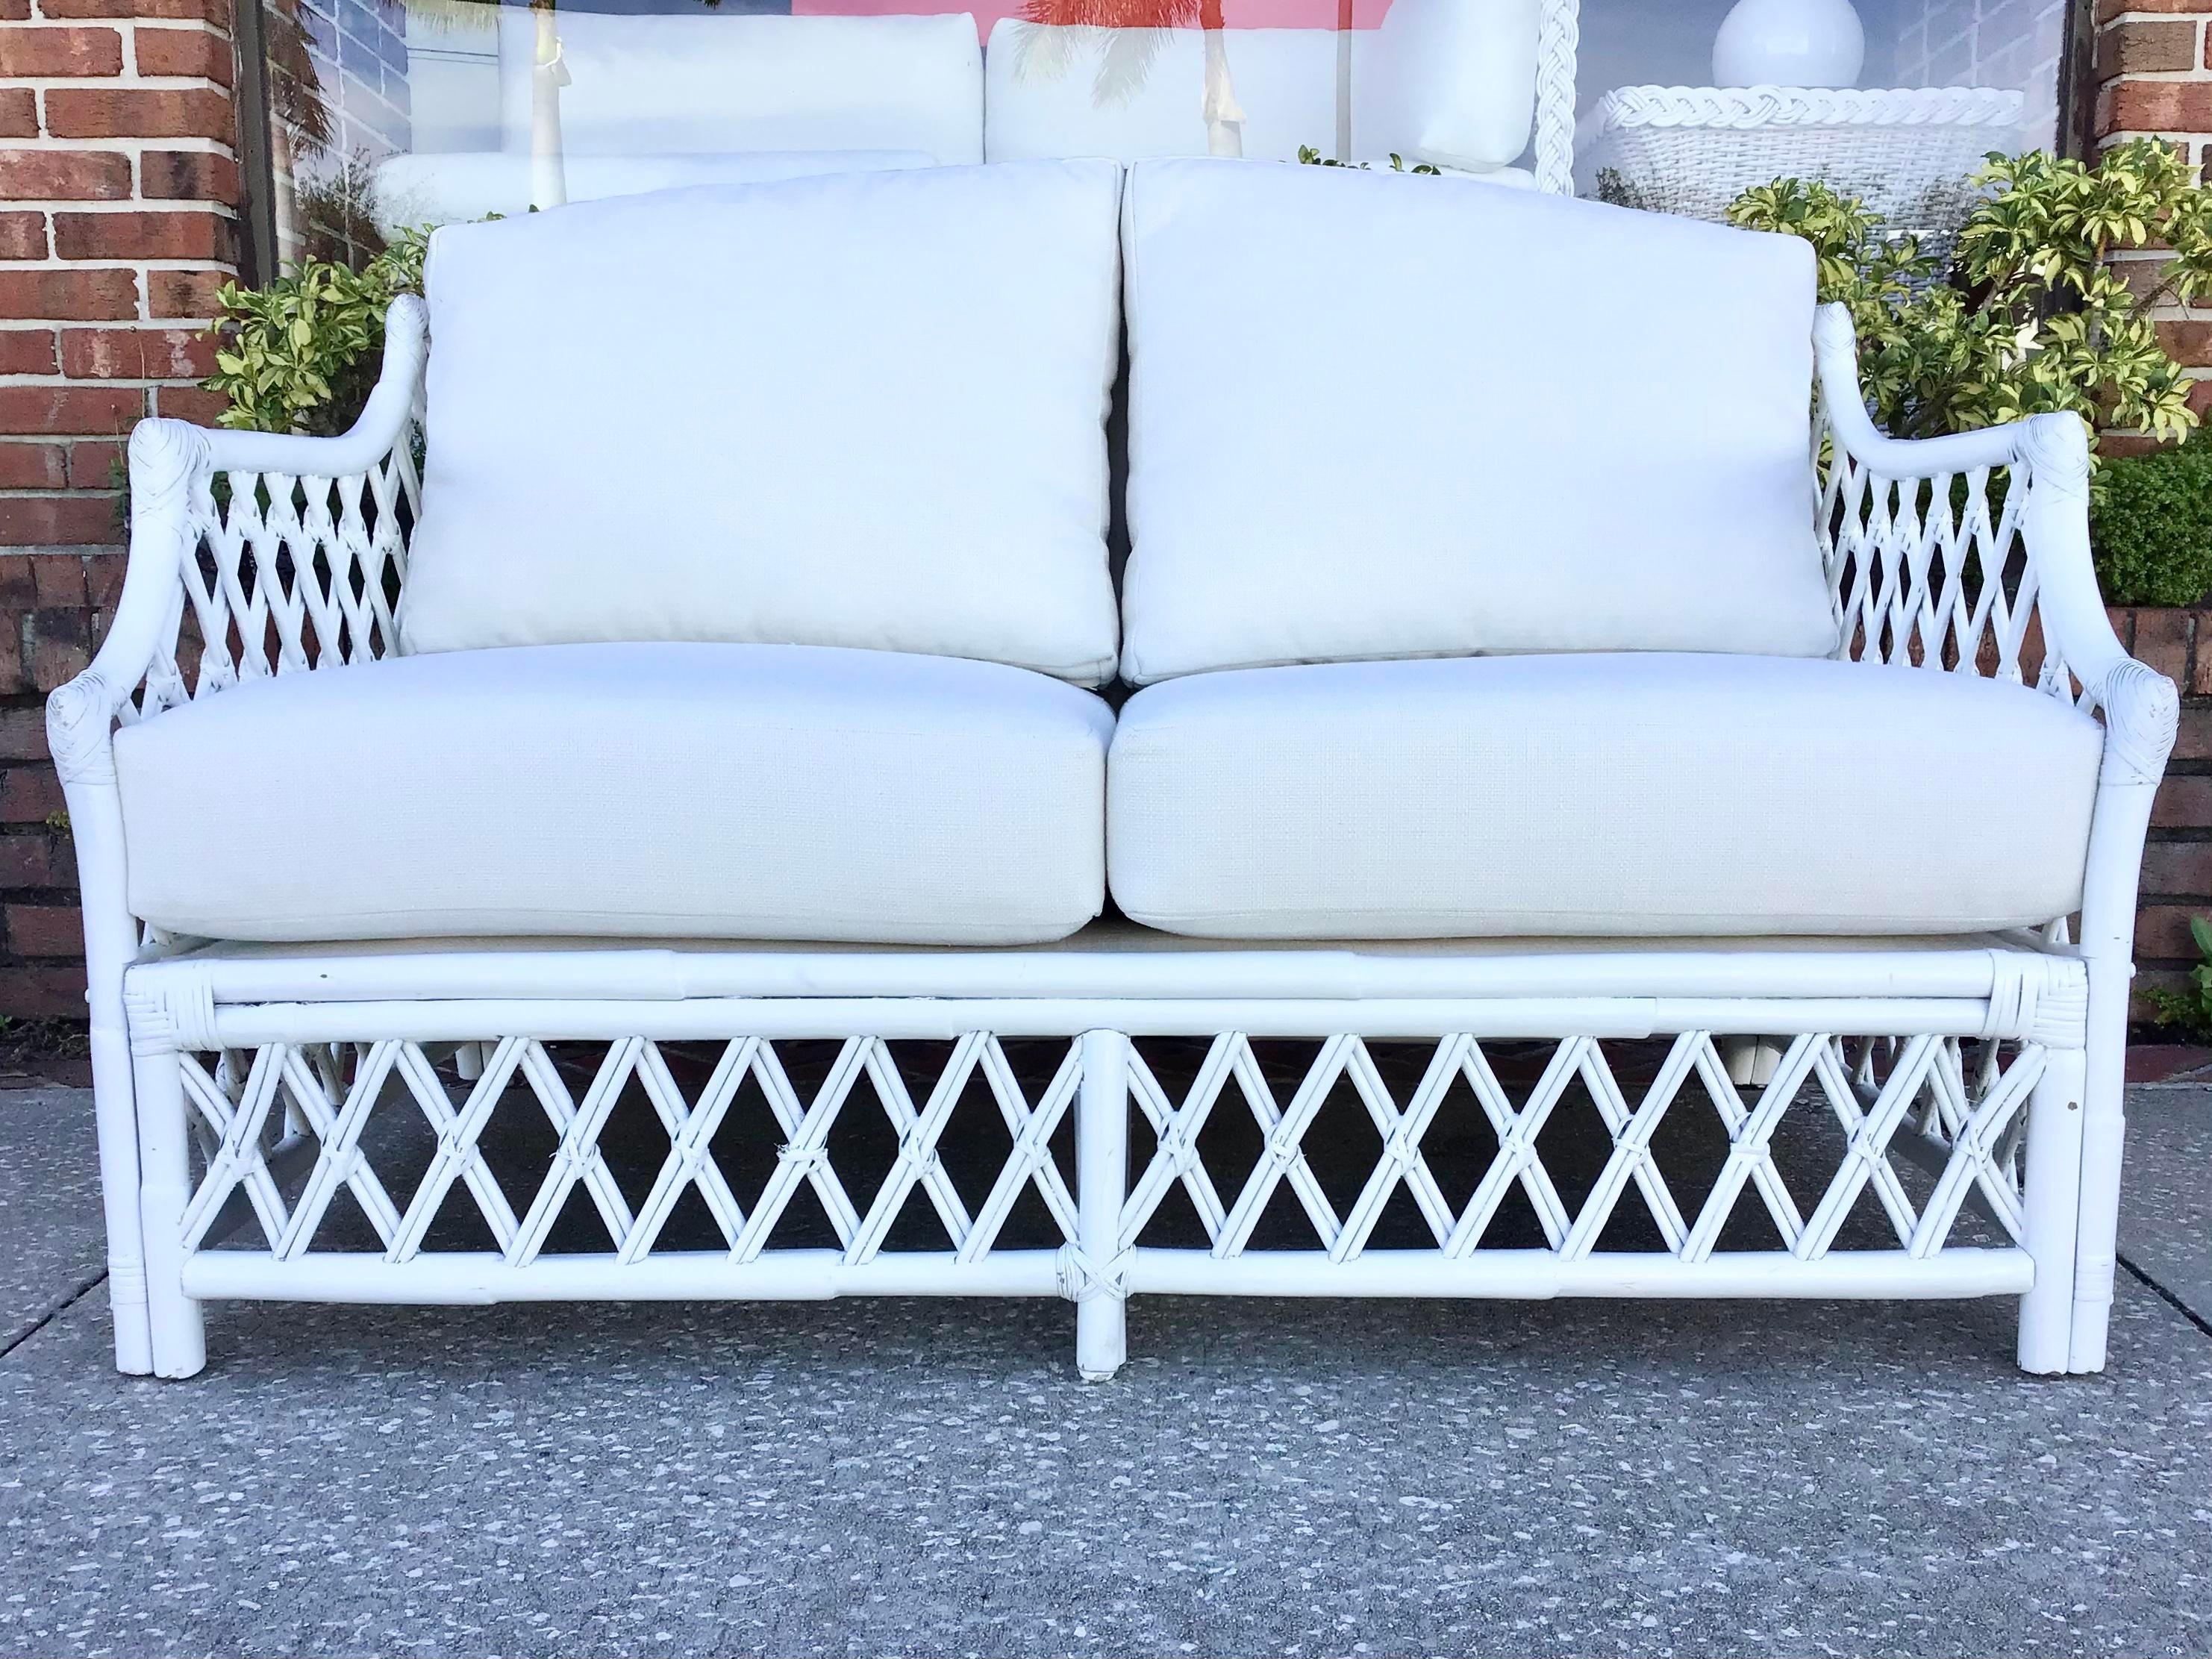 Fantastic Boho Chic Ficks Reed petite rattan loveseat freshly lacquered in white and new Todd Hase upholstered cushions. This would be a great addition to your Boho Chic inspired home.